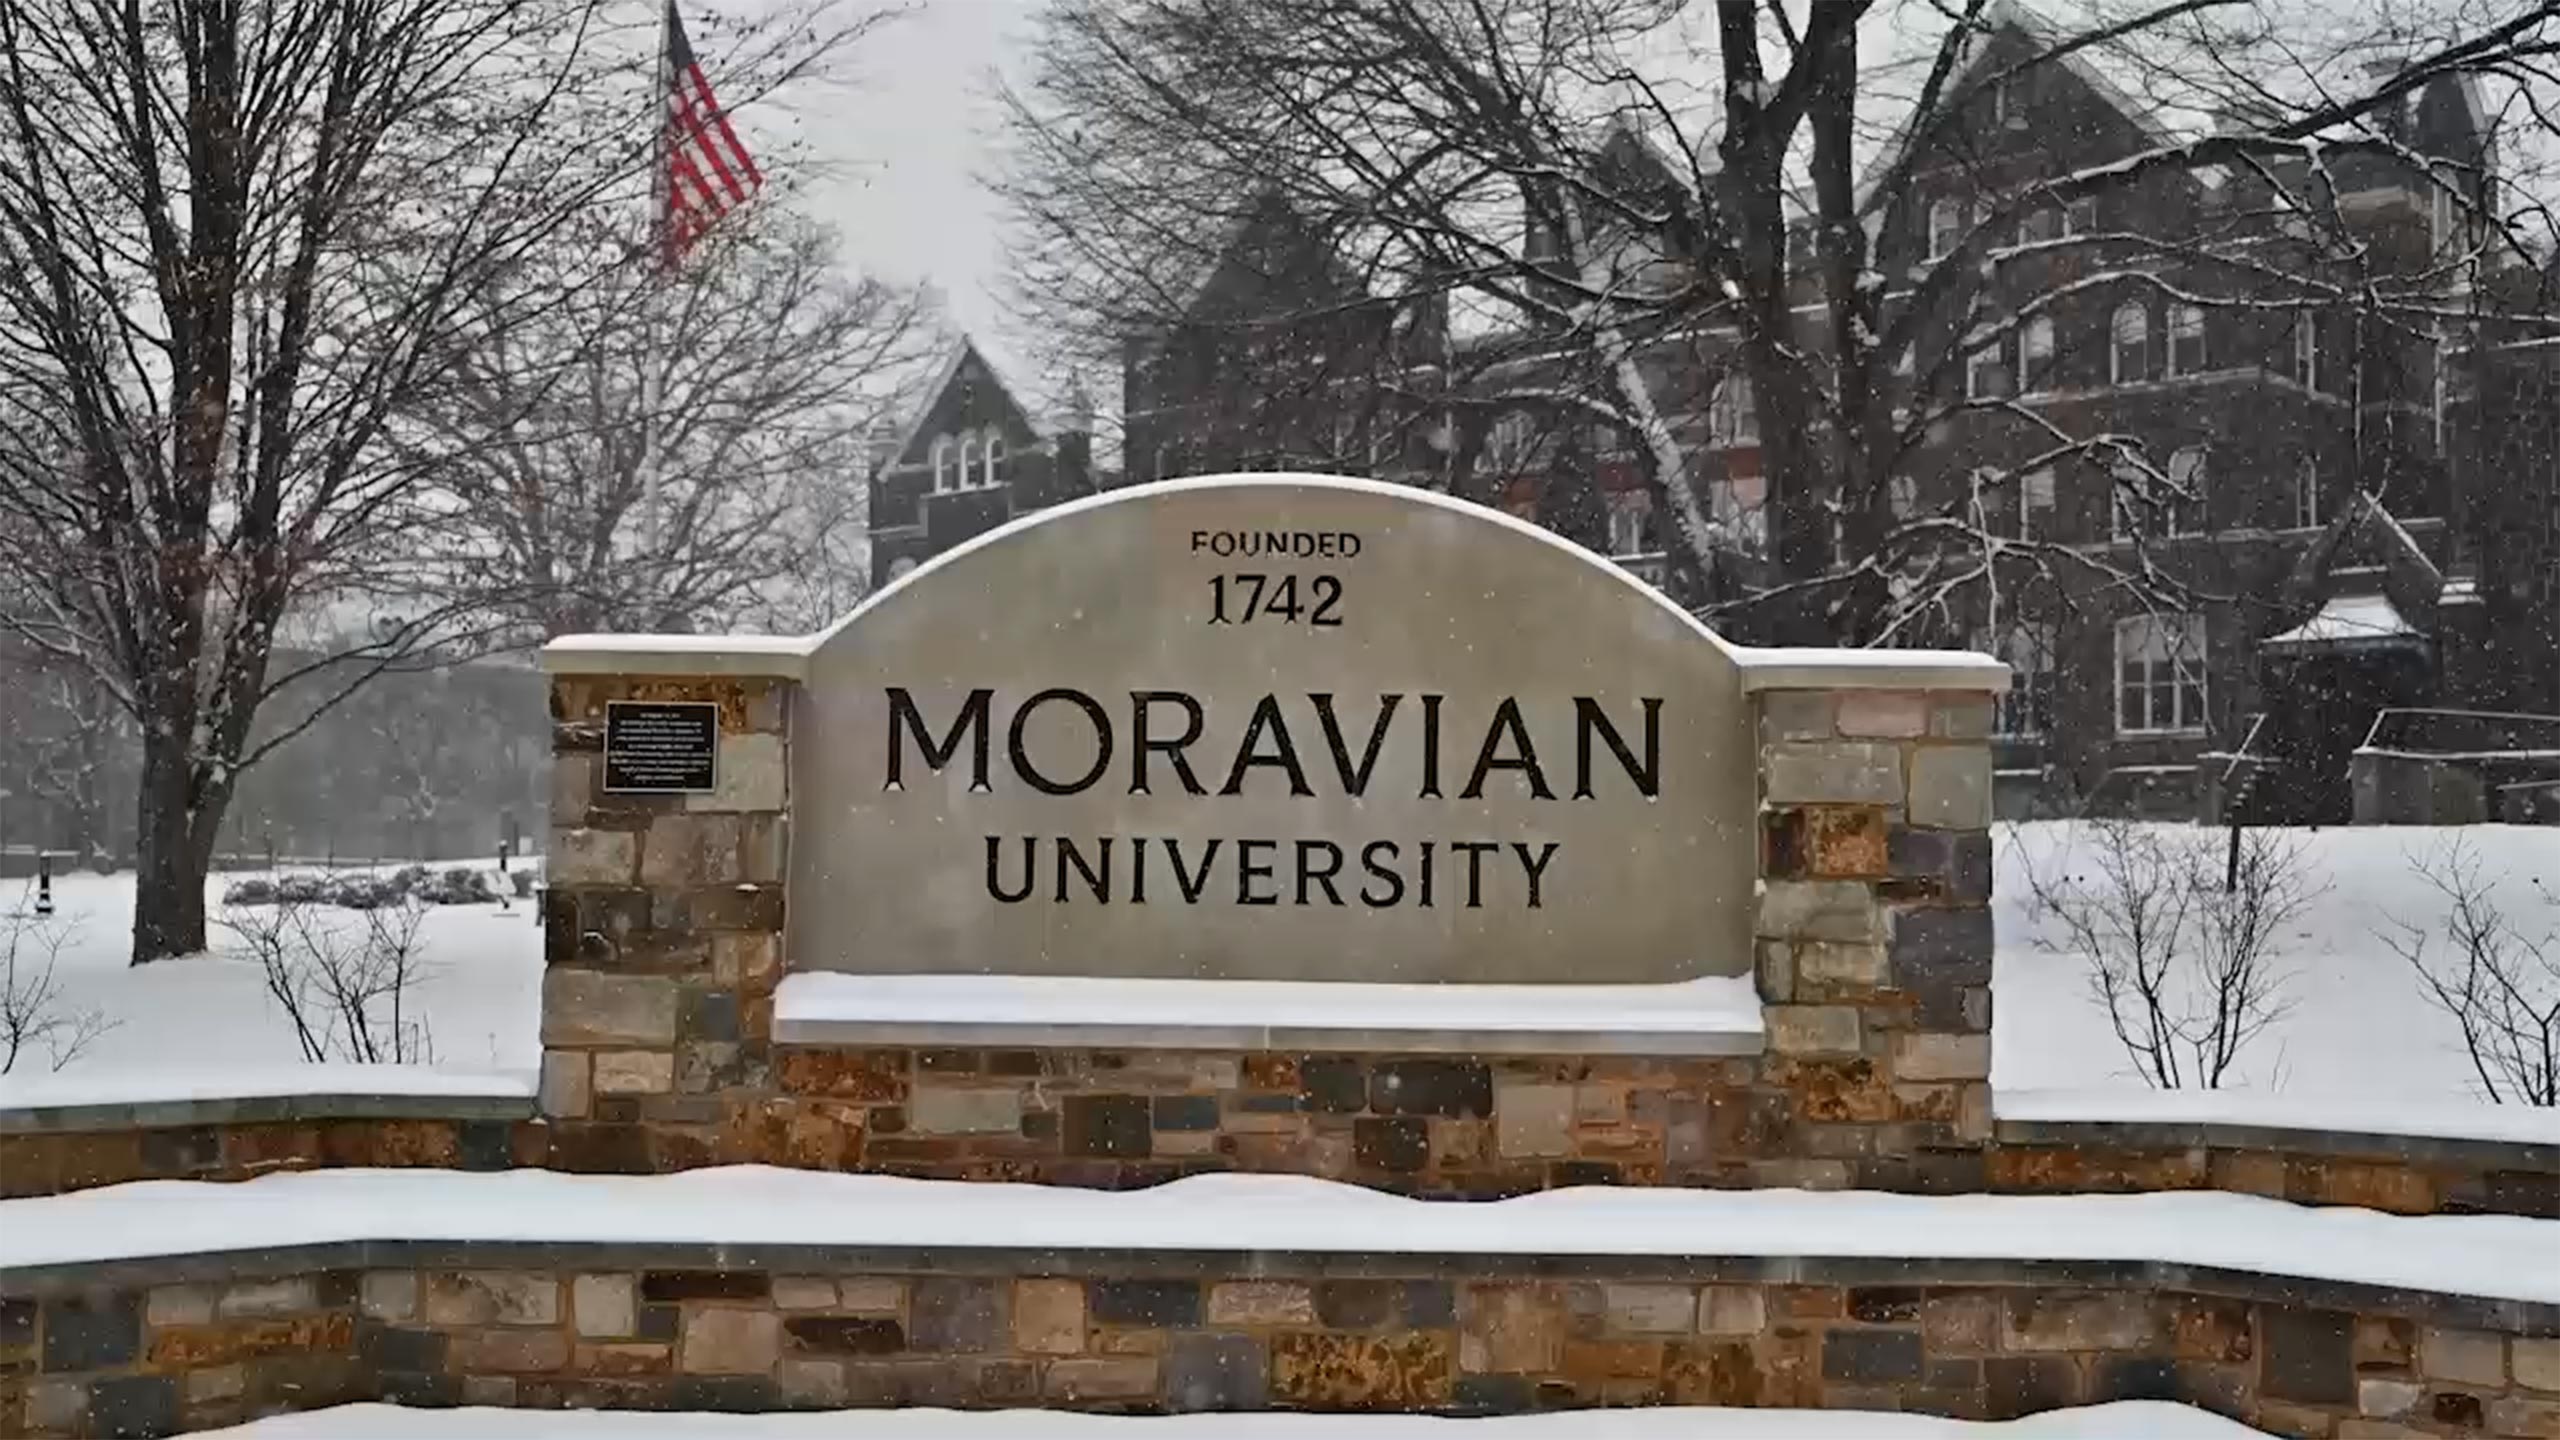 Moravian sign in the snow